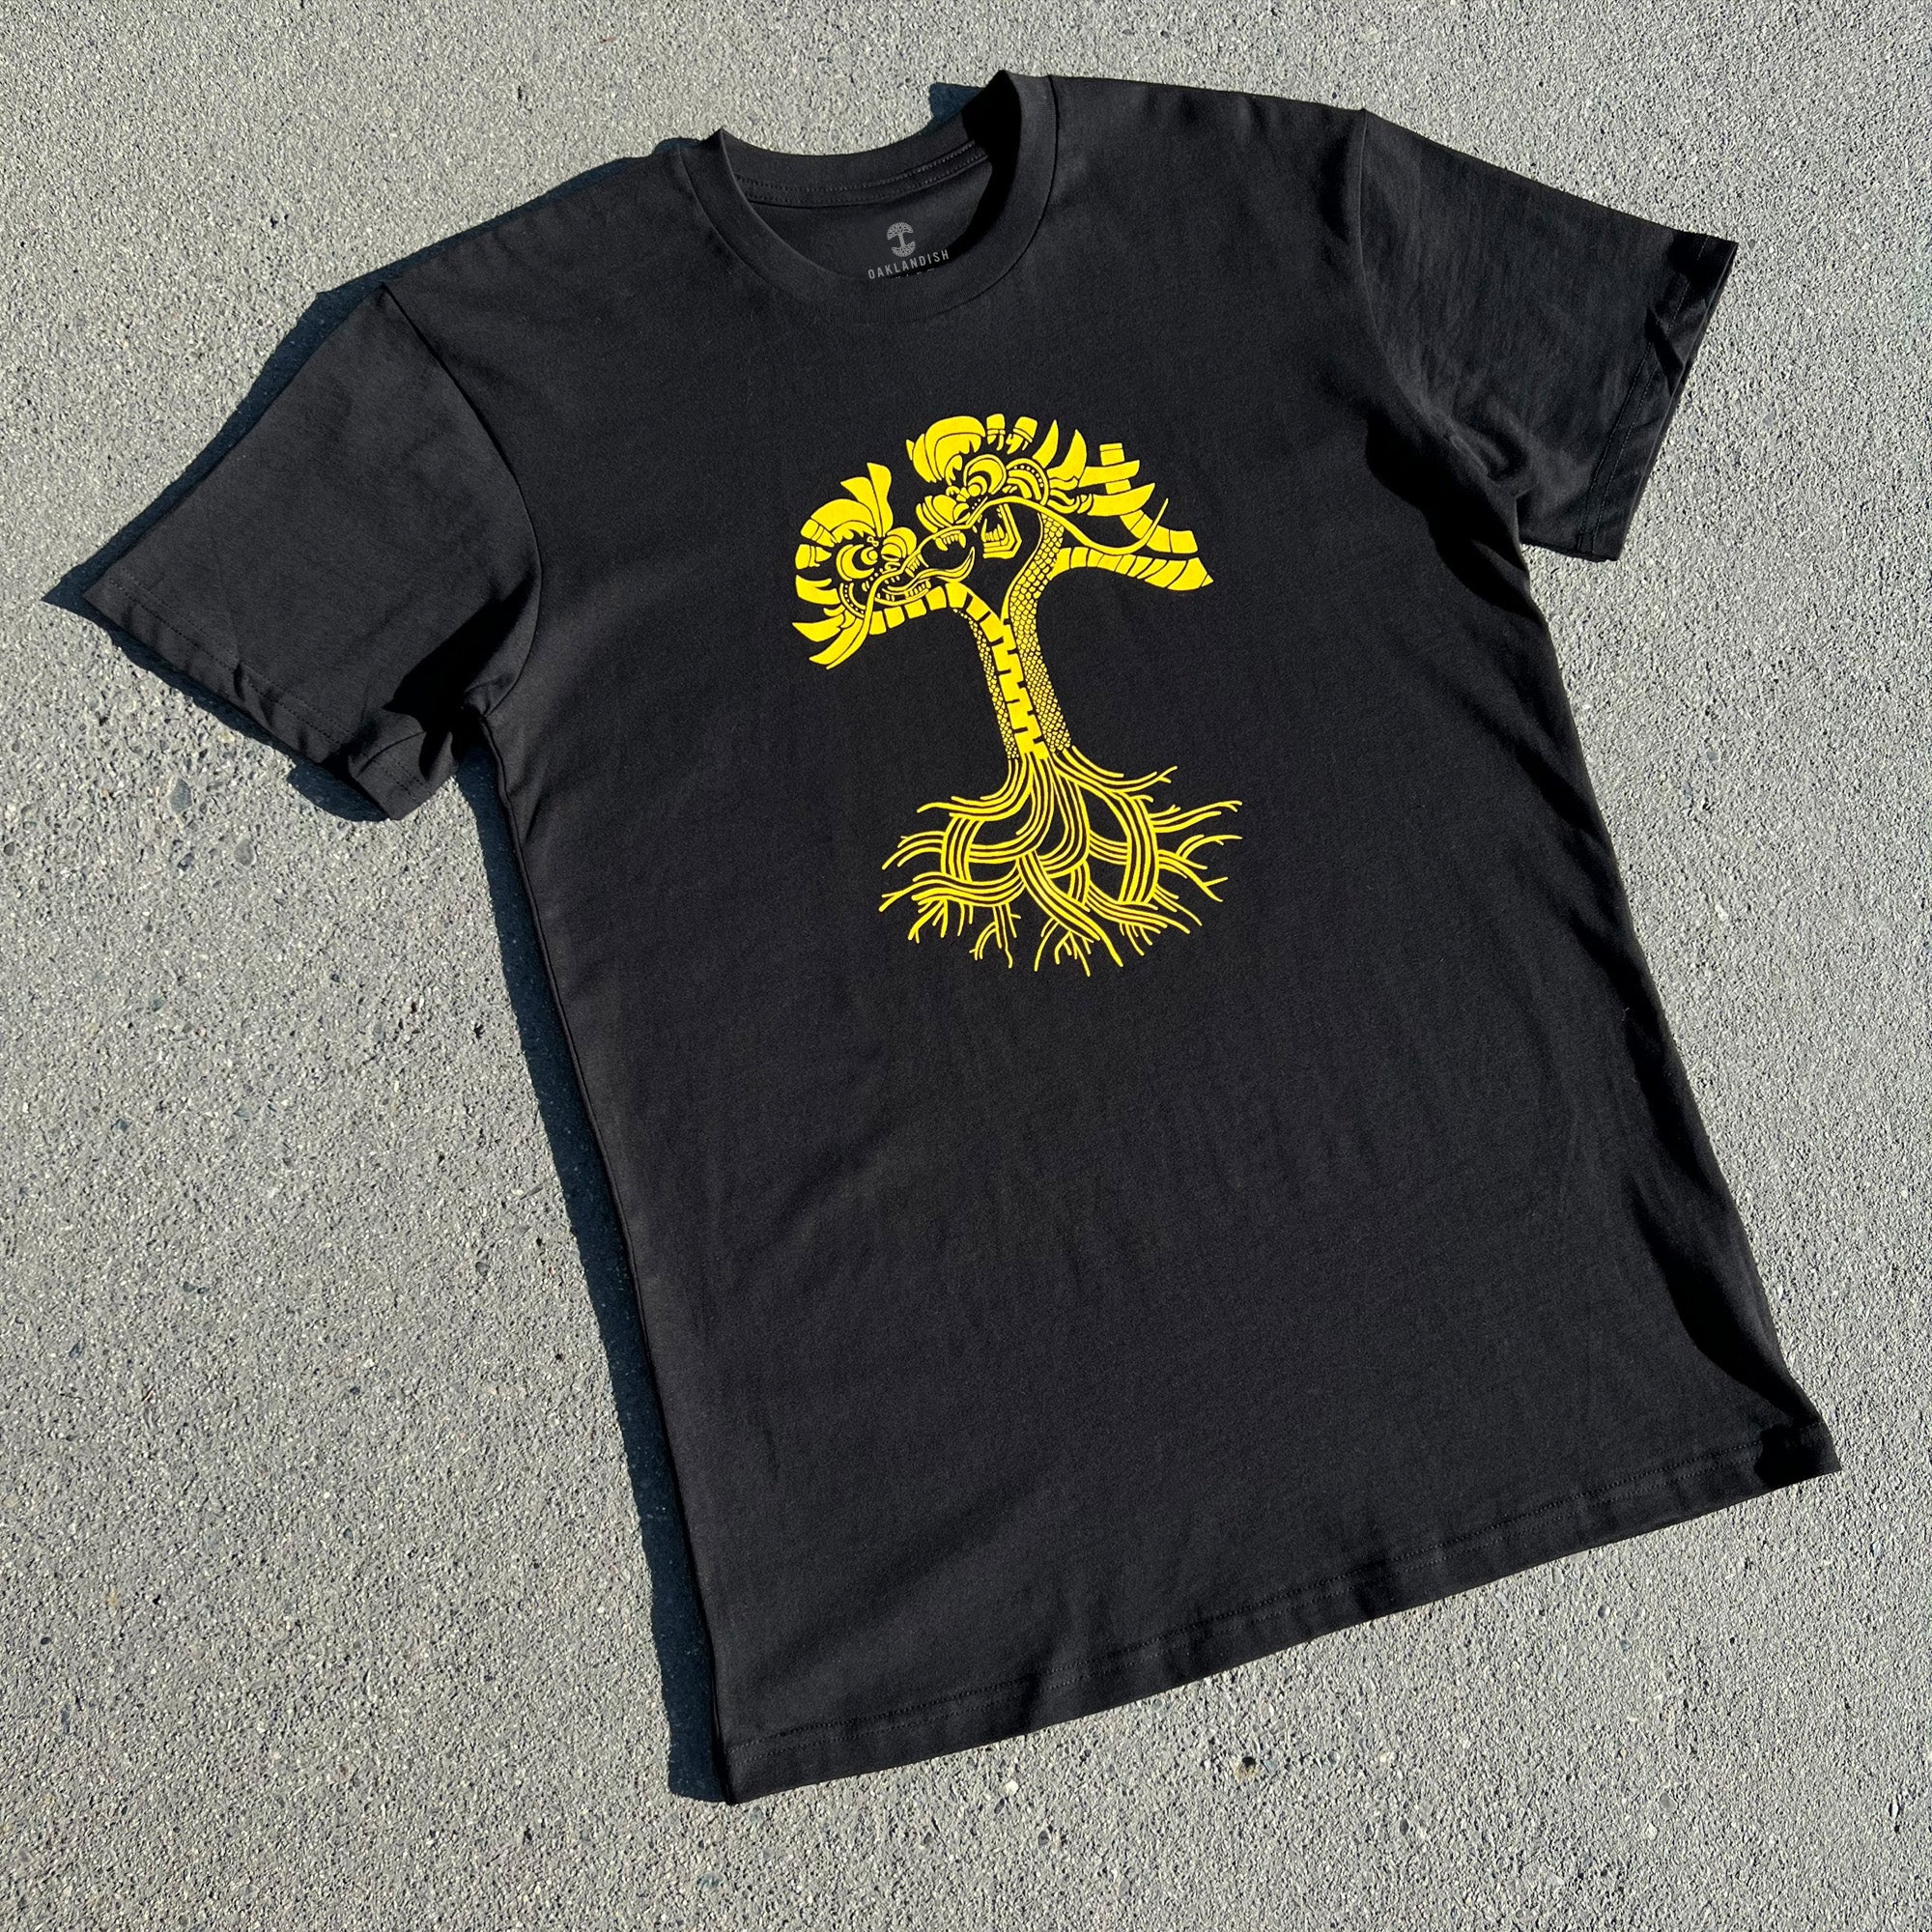 Black t-shirt with gold dragon power graphic design in the shape of an Oaklandish tree logo laying outdoors on asphalt.